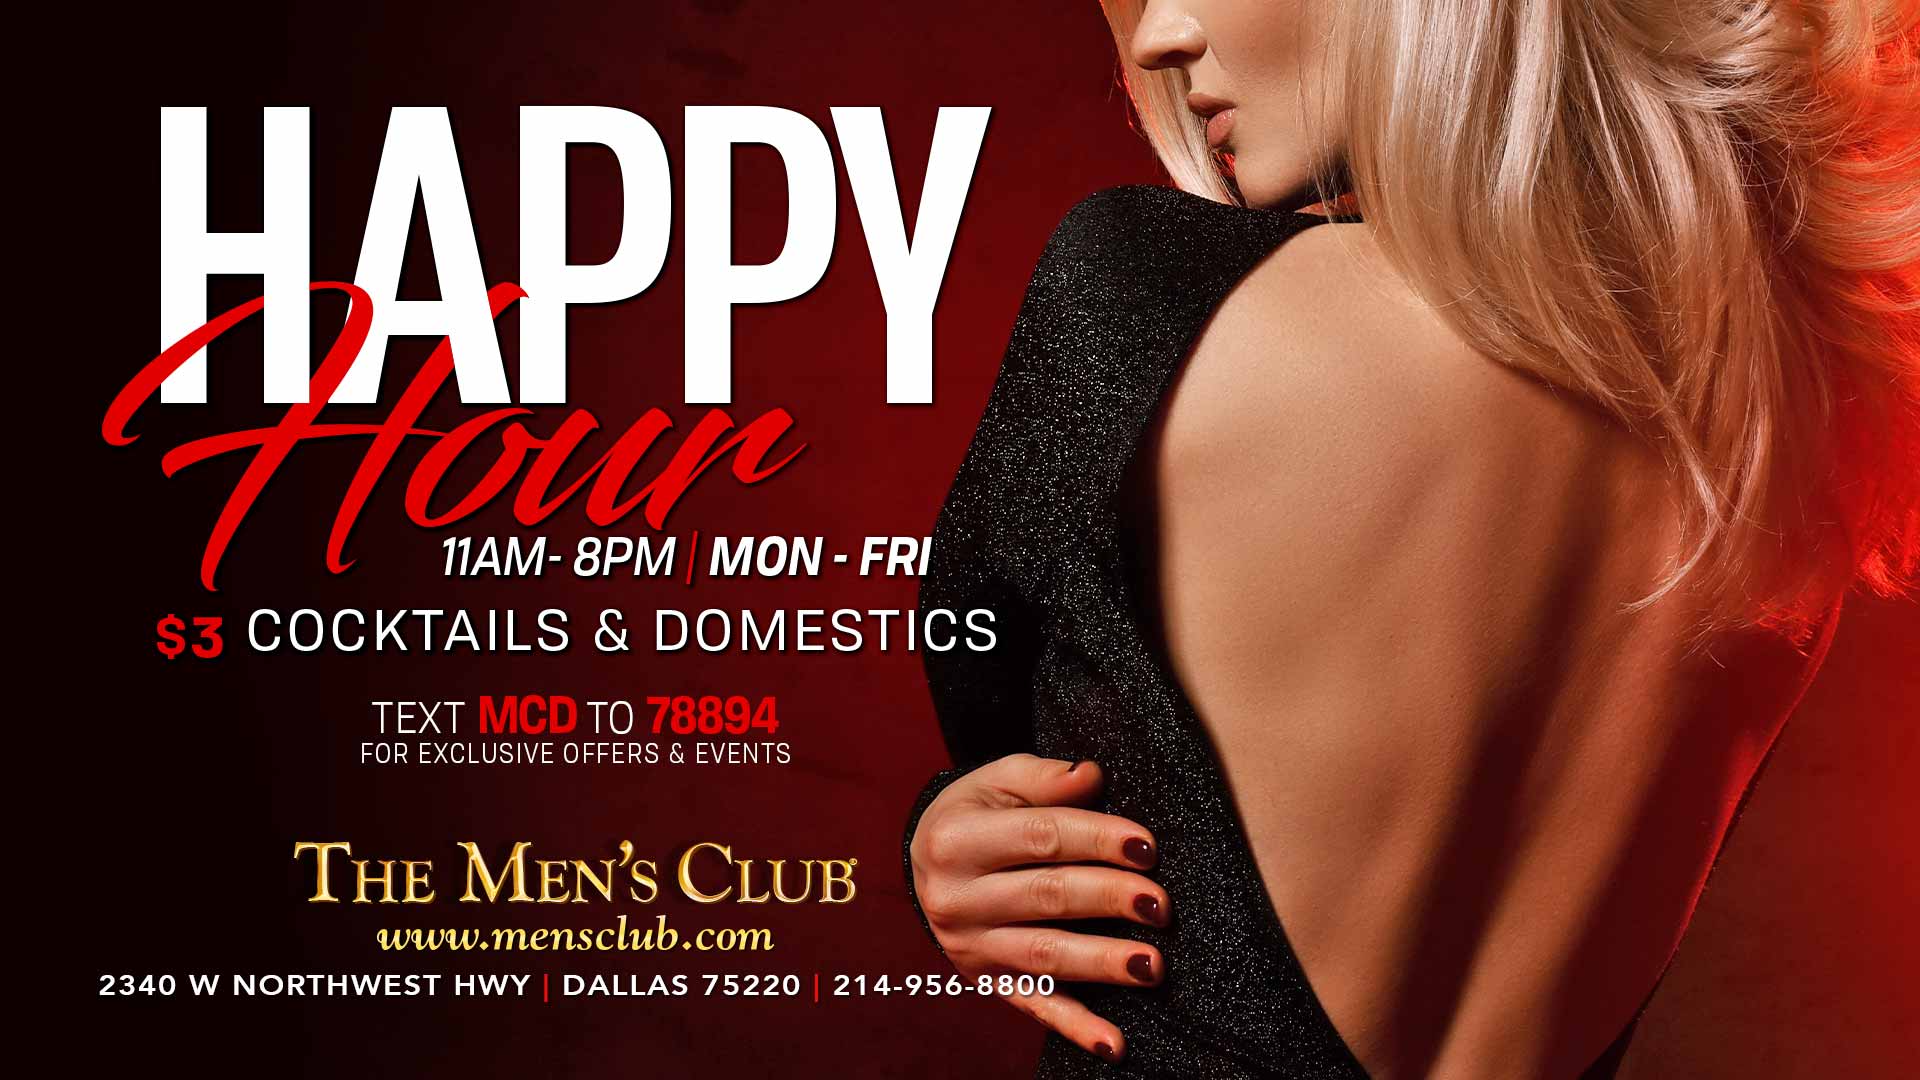 image of sexy blonde in black cocktail dress promoting Happy Hour at The Men's Club of Dallas